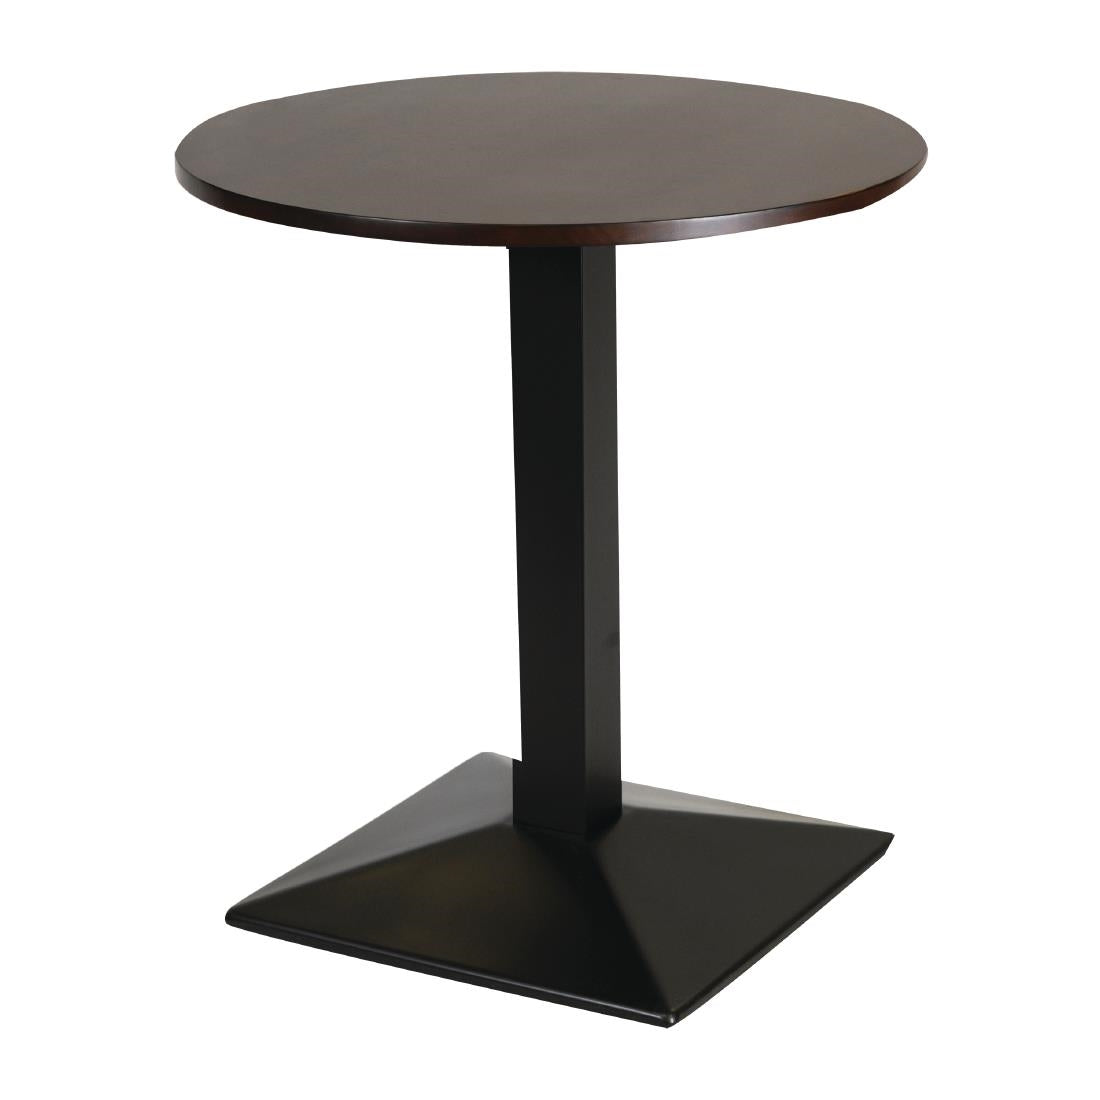 FT499 Turin Metal Base Pedestal Round Table with Dark Wood Top 700mm JD Catering Equipment Solutions Ltd